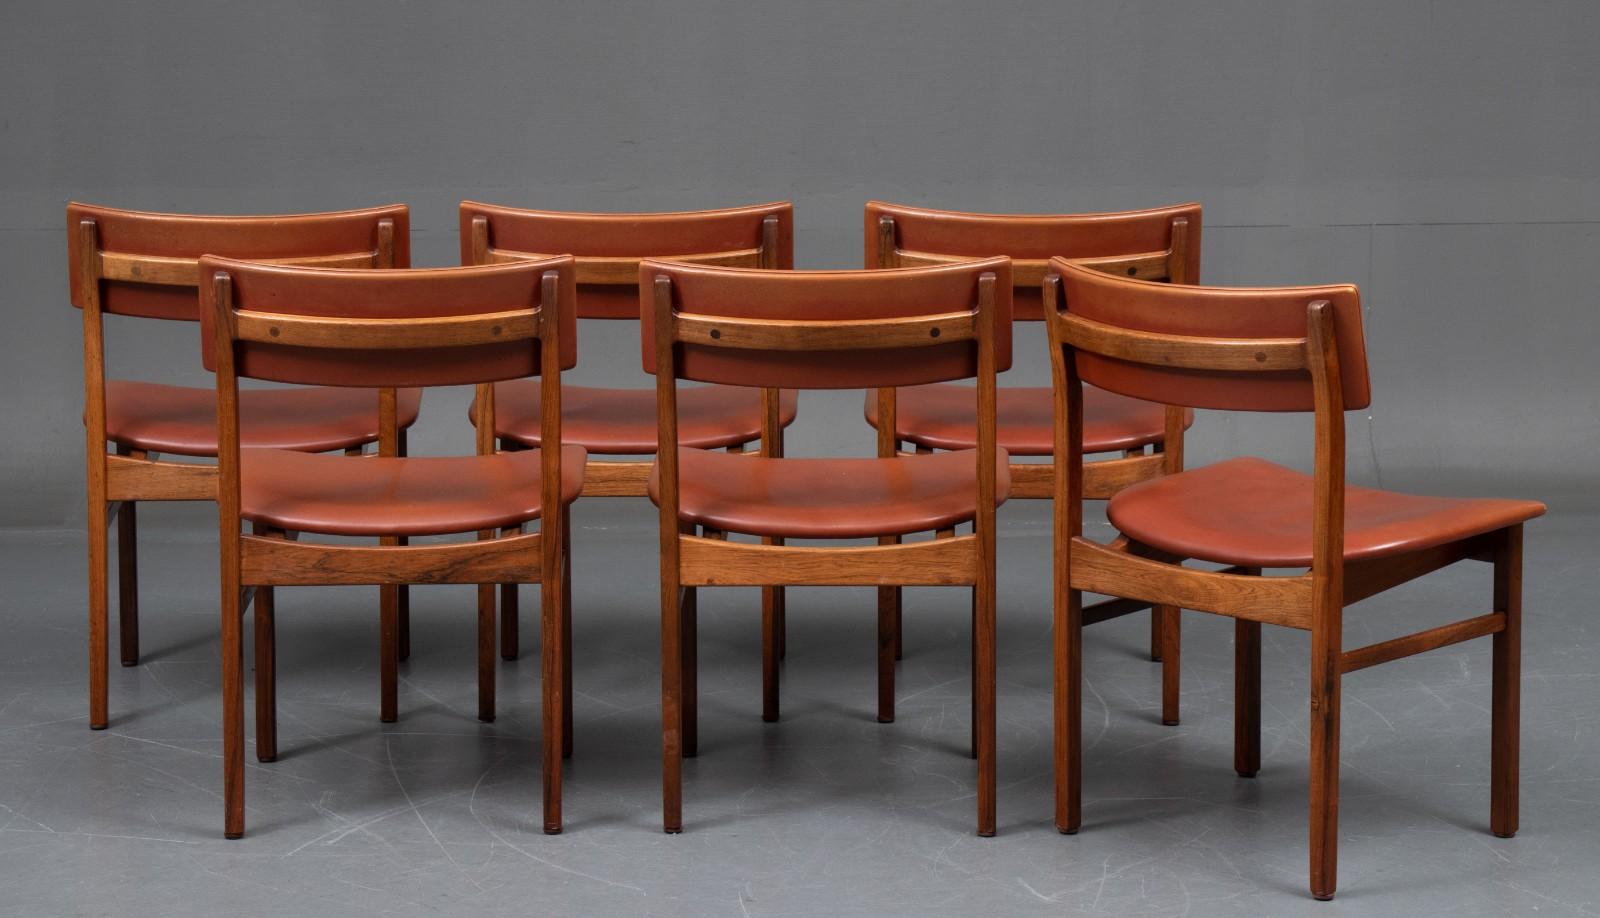 Set of 6 dining chairs designed by Kurt Östervig for K.P. Möller furniture makers. Rosewood and cognac leather. Comes with Cites certificate so only available in Europe.

Kurt Østervig (1912-1986) began his career as a naval architect in Odense,